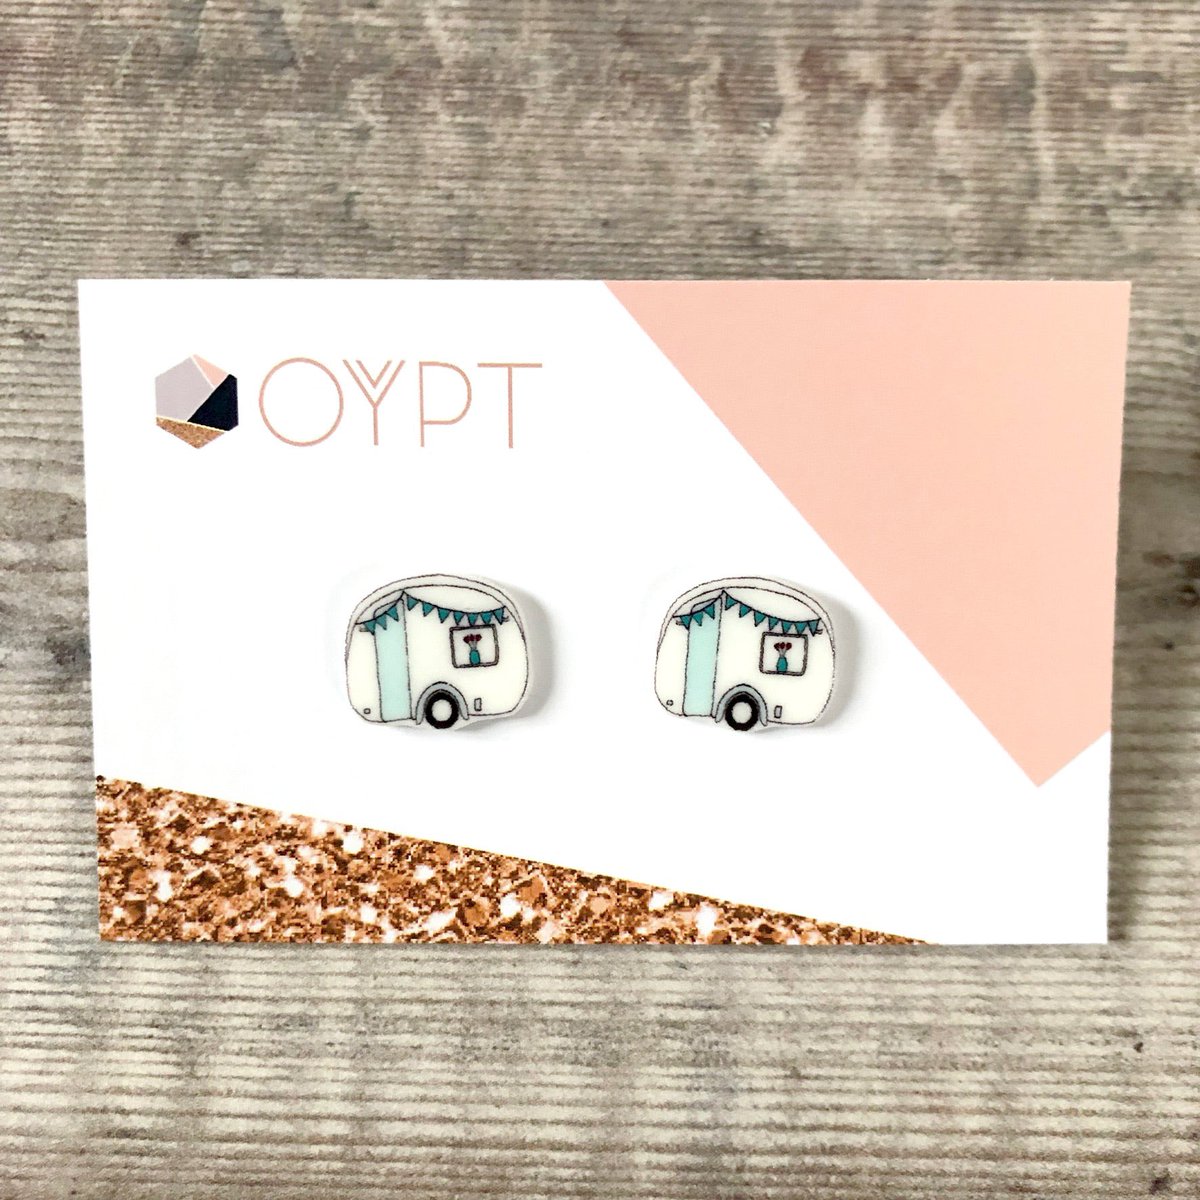 Morning #EarlyBiz I’ve got a little something for all the caravanners today. #caravan #shopindie #etsycommunity oyptjewellery.etsy.com